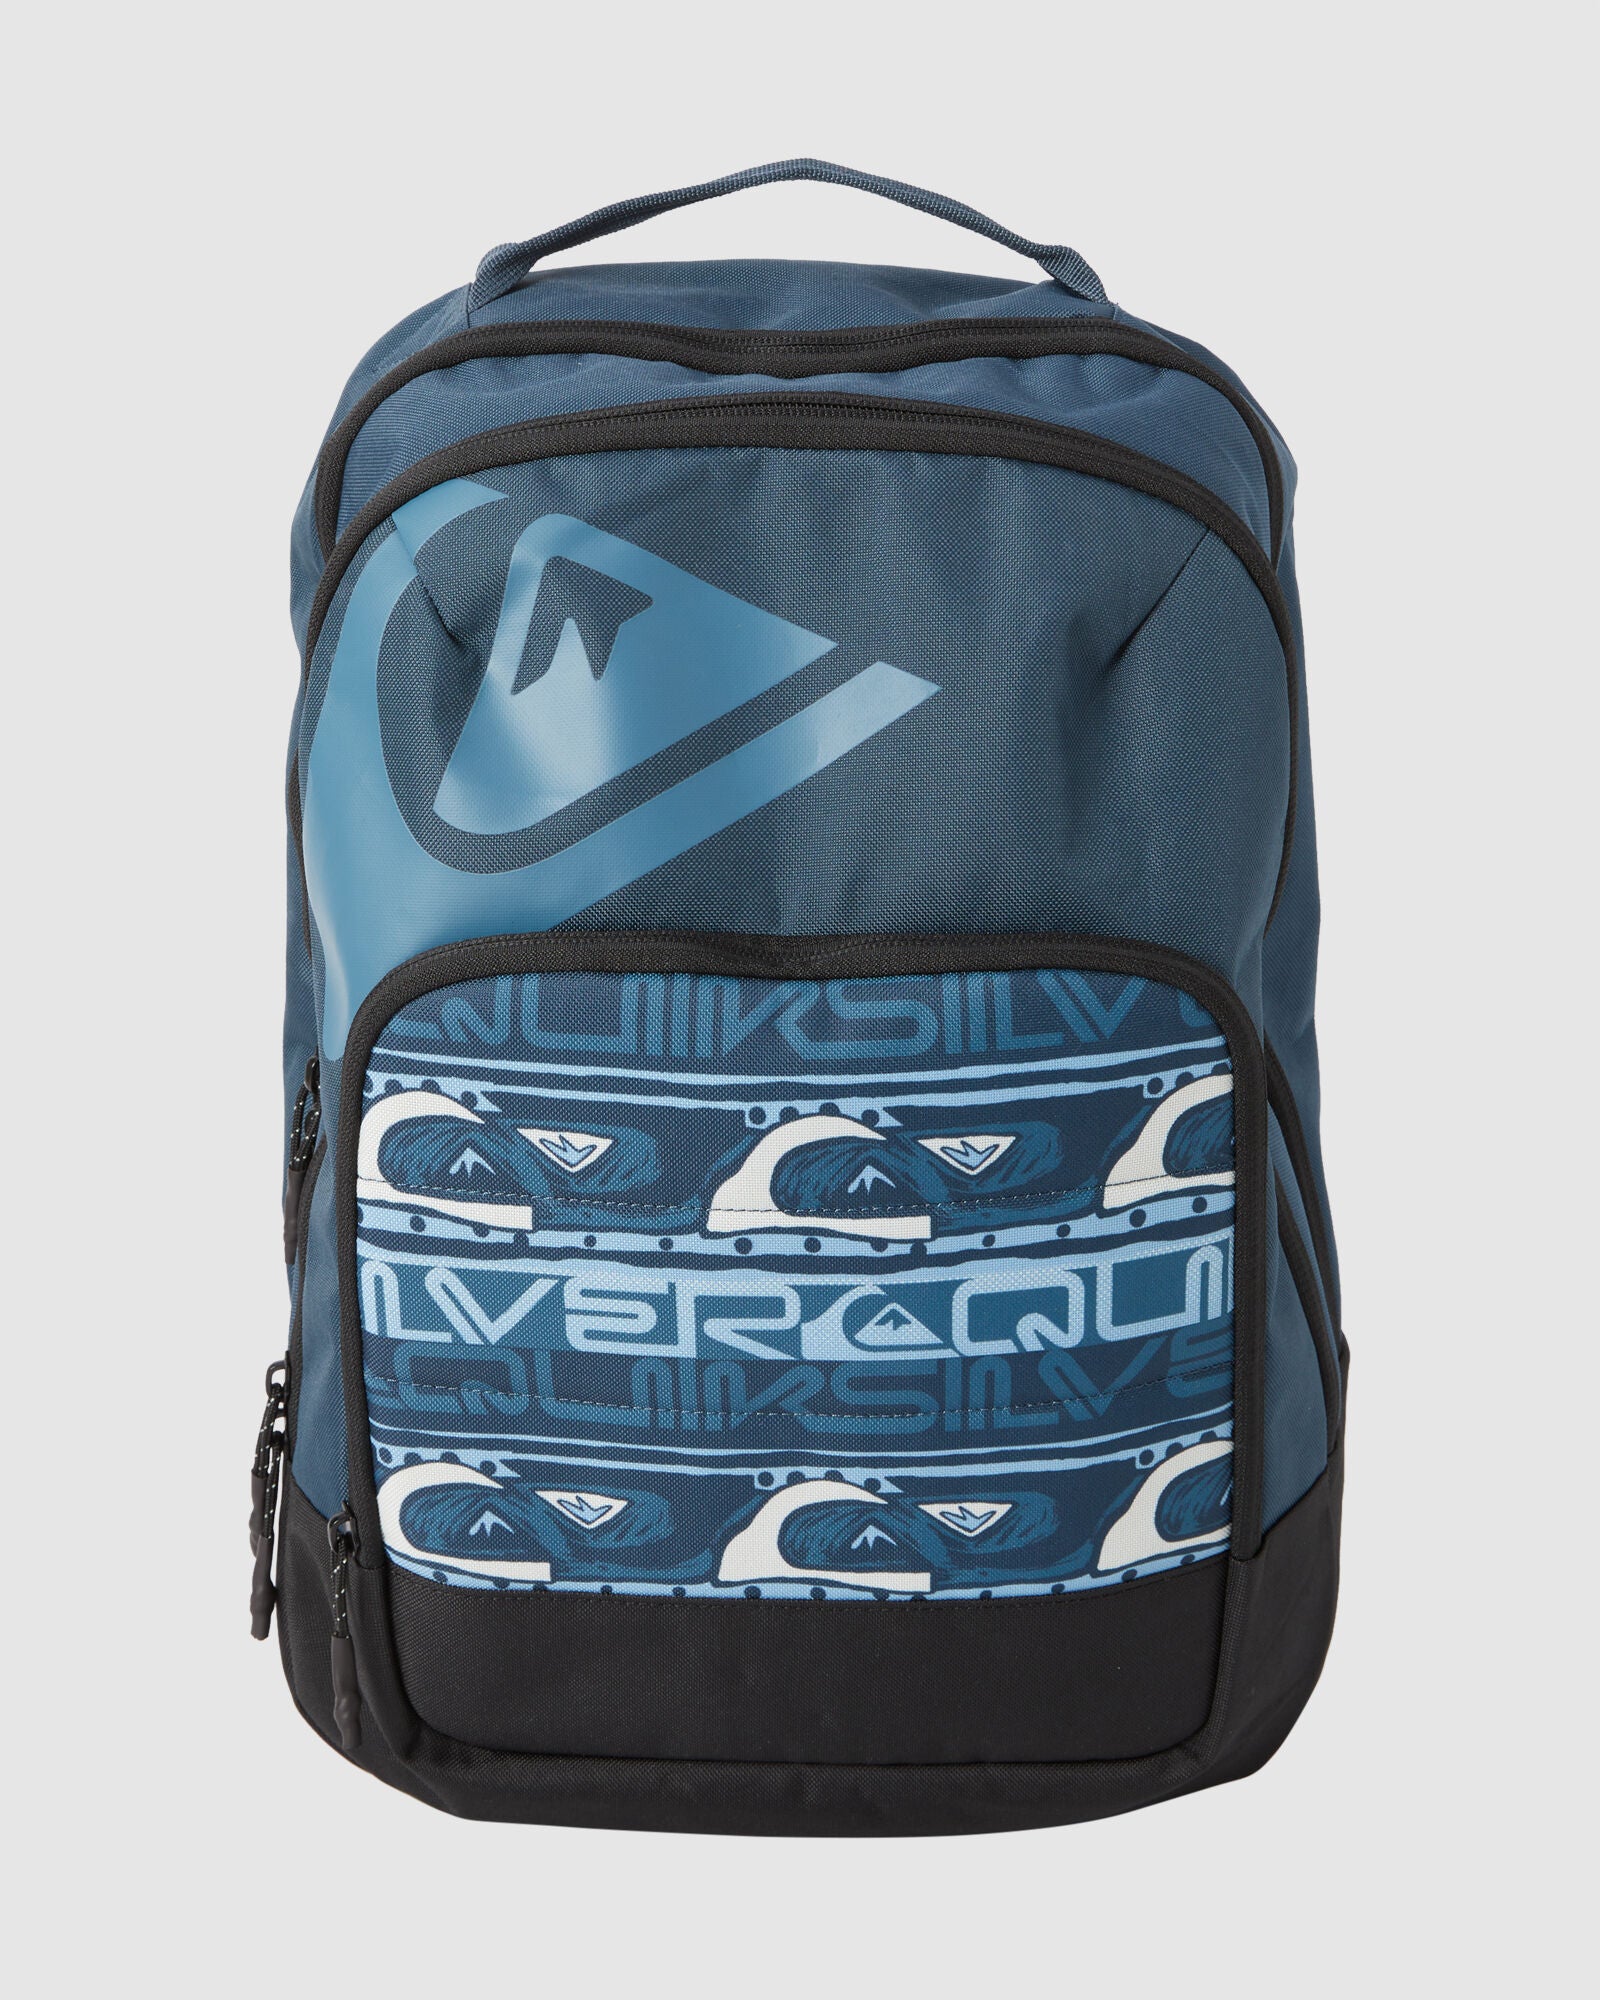 BURST 2.0 AEGEAN BLUE QUIKSILVER BACK PACK BACK TO SCHOOL ACCESSORIES